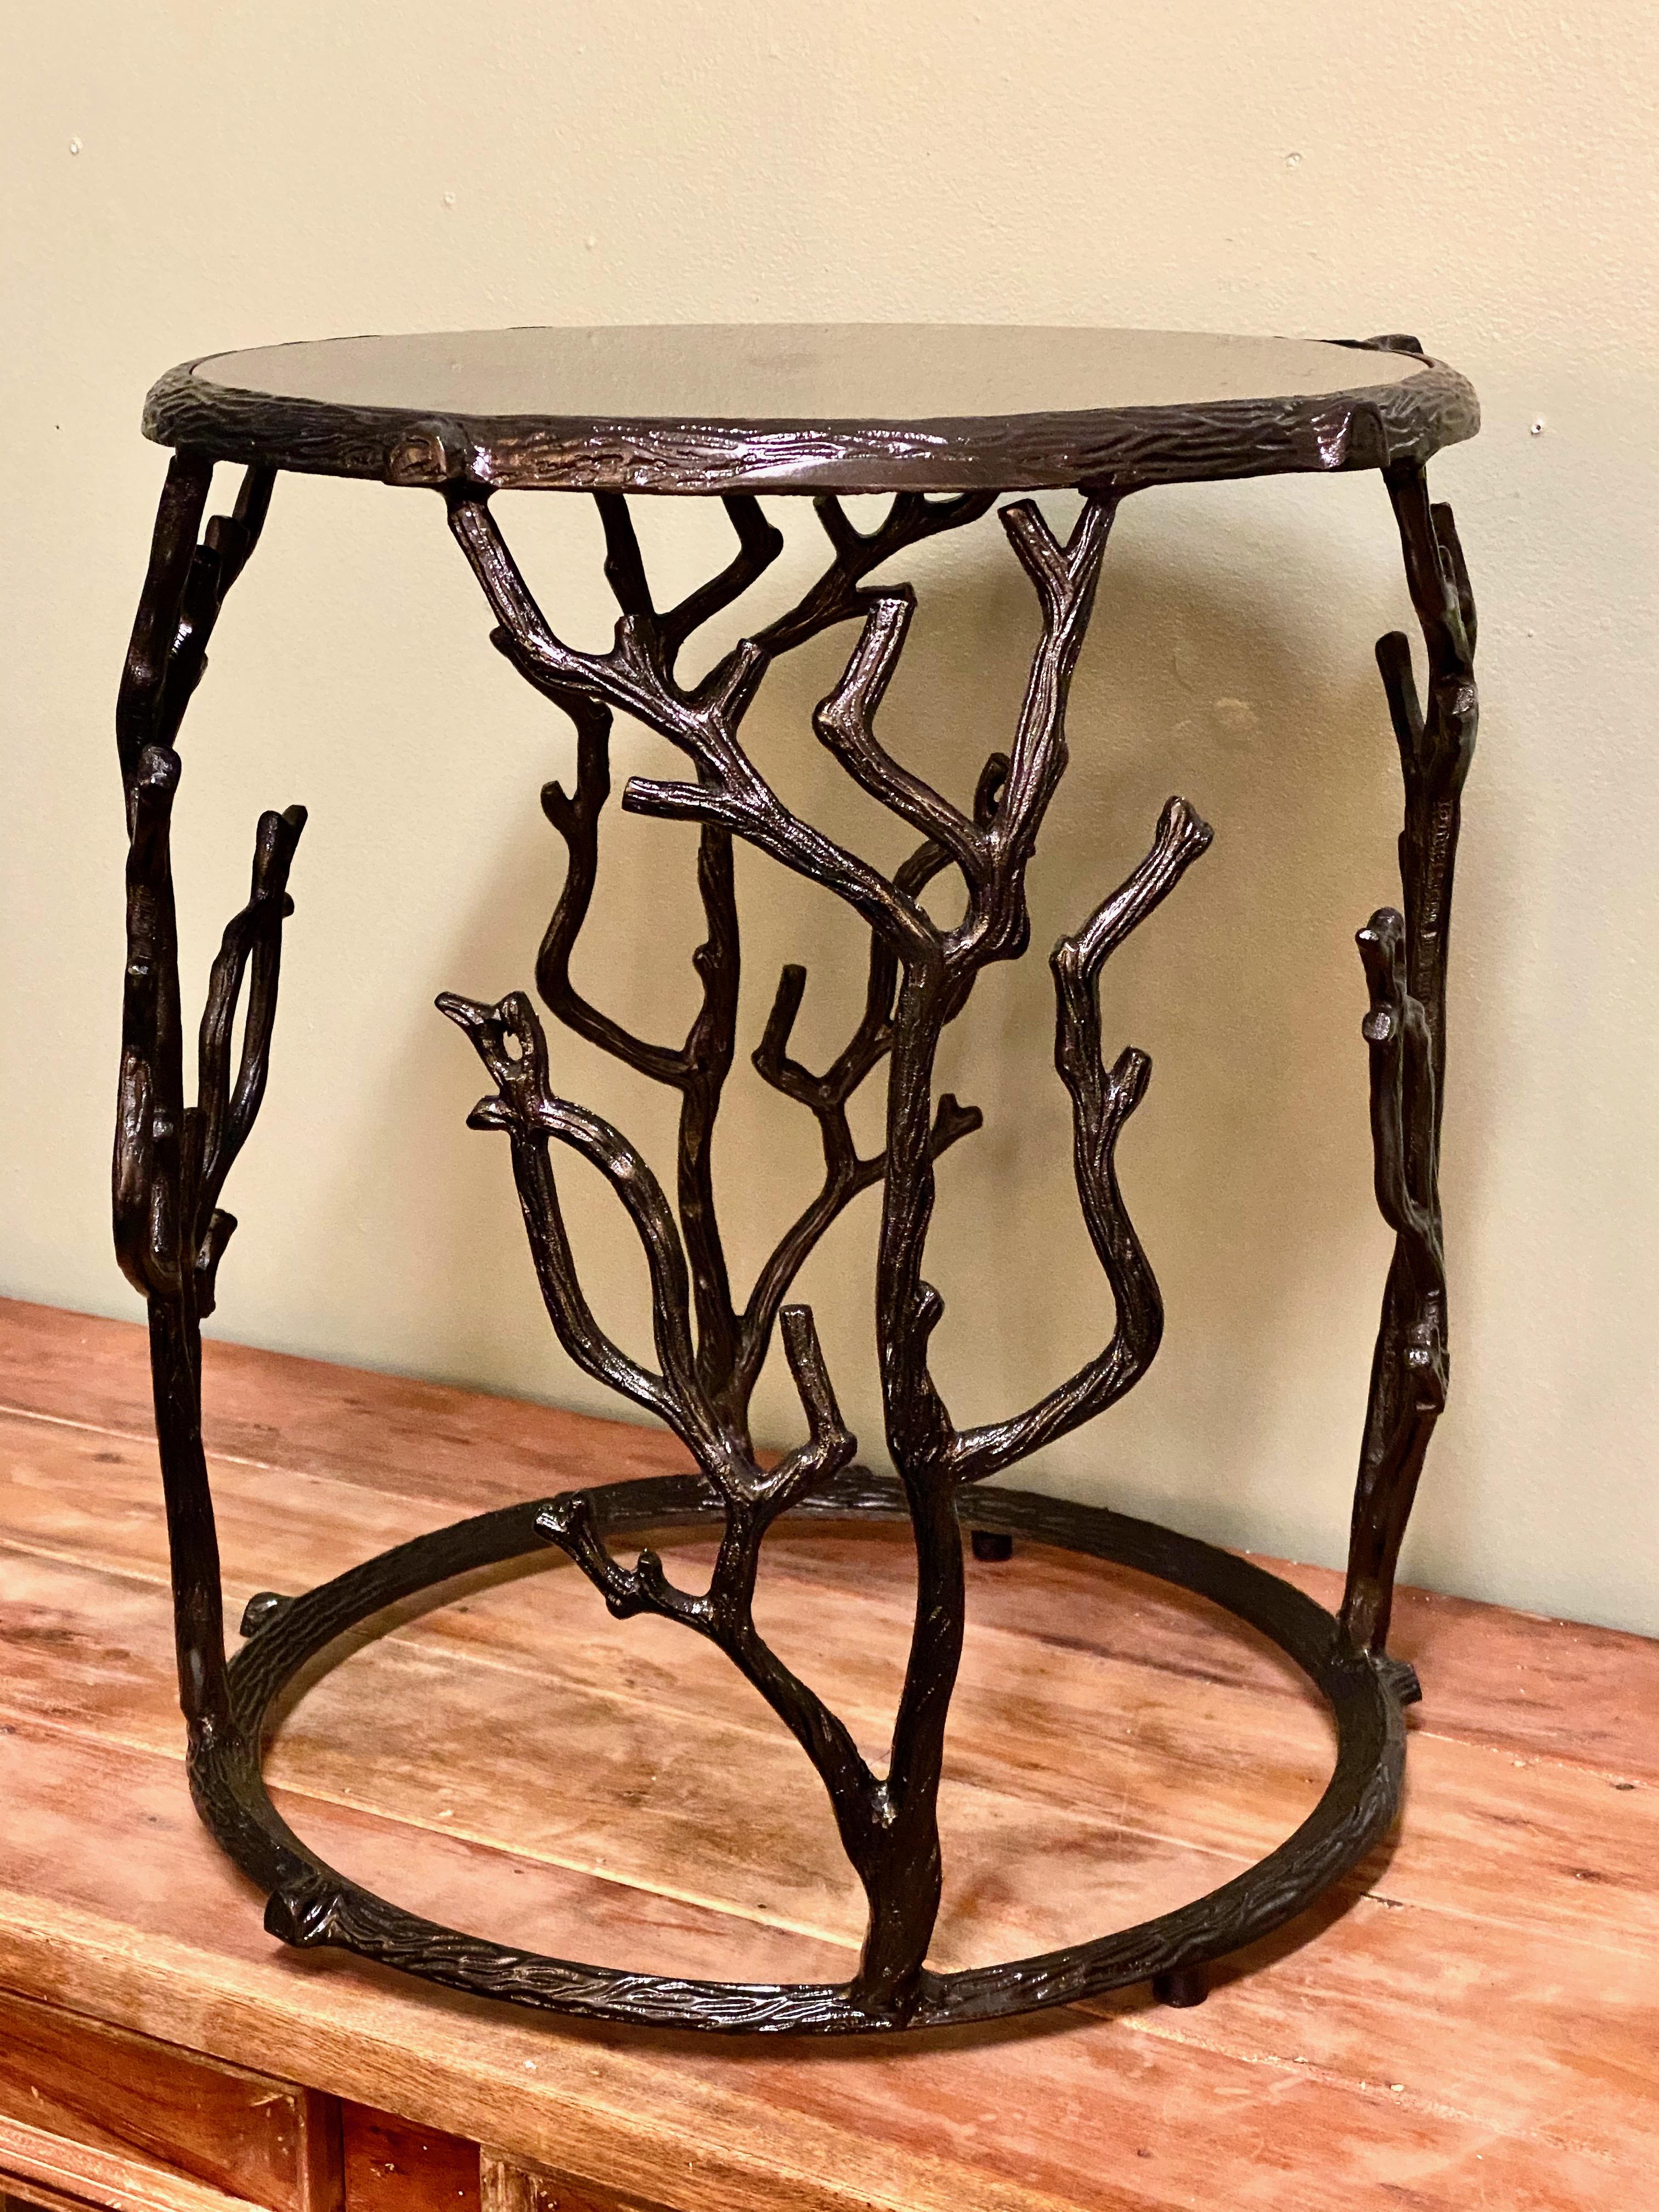 This is a charming round occasional or drinks table with a cast metal faux bois frame top with black granite.
The sculptural branch outline adds a bit of emphasis and that important touch of black.